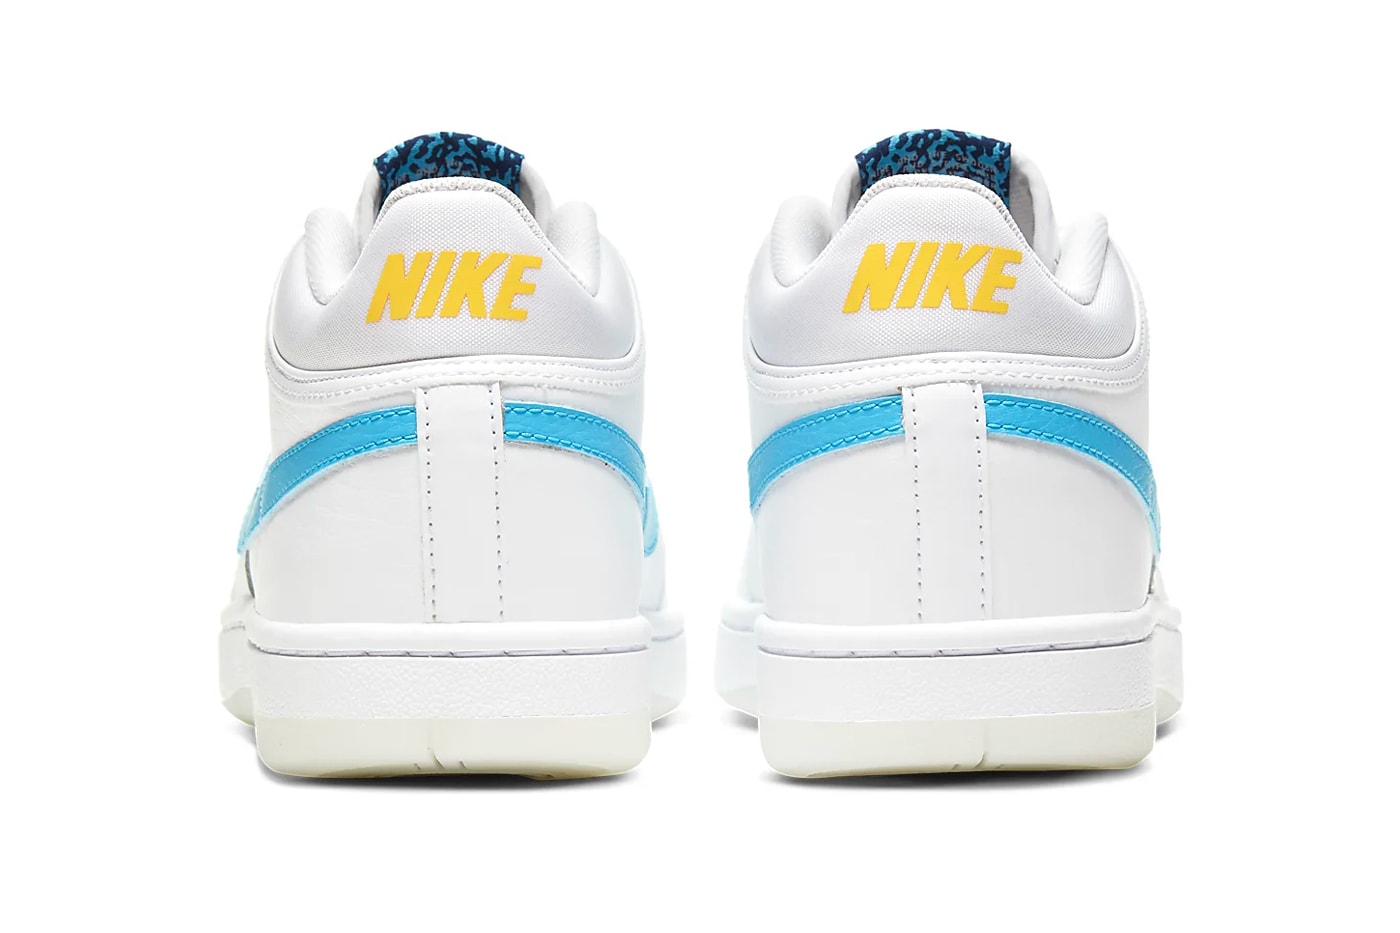 Nike Sky Force 3 4 University Gold Blue Void Blue Fury Black White sneakers footwear menswear shoes spring summer 2020 collection trainers runners kicks